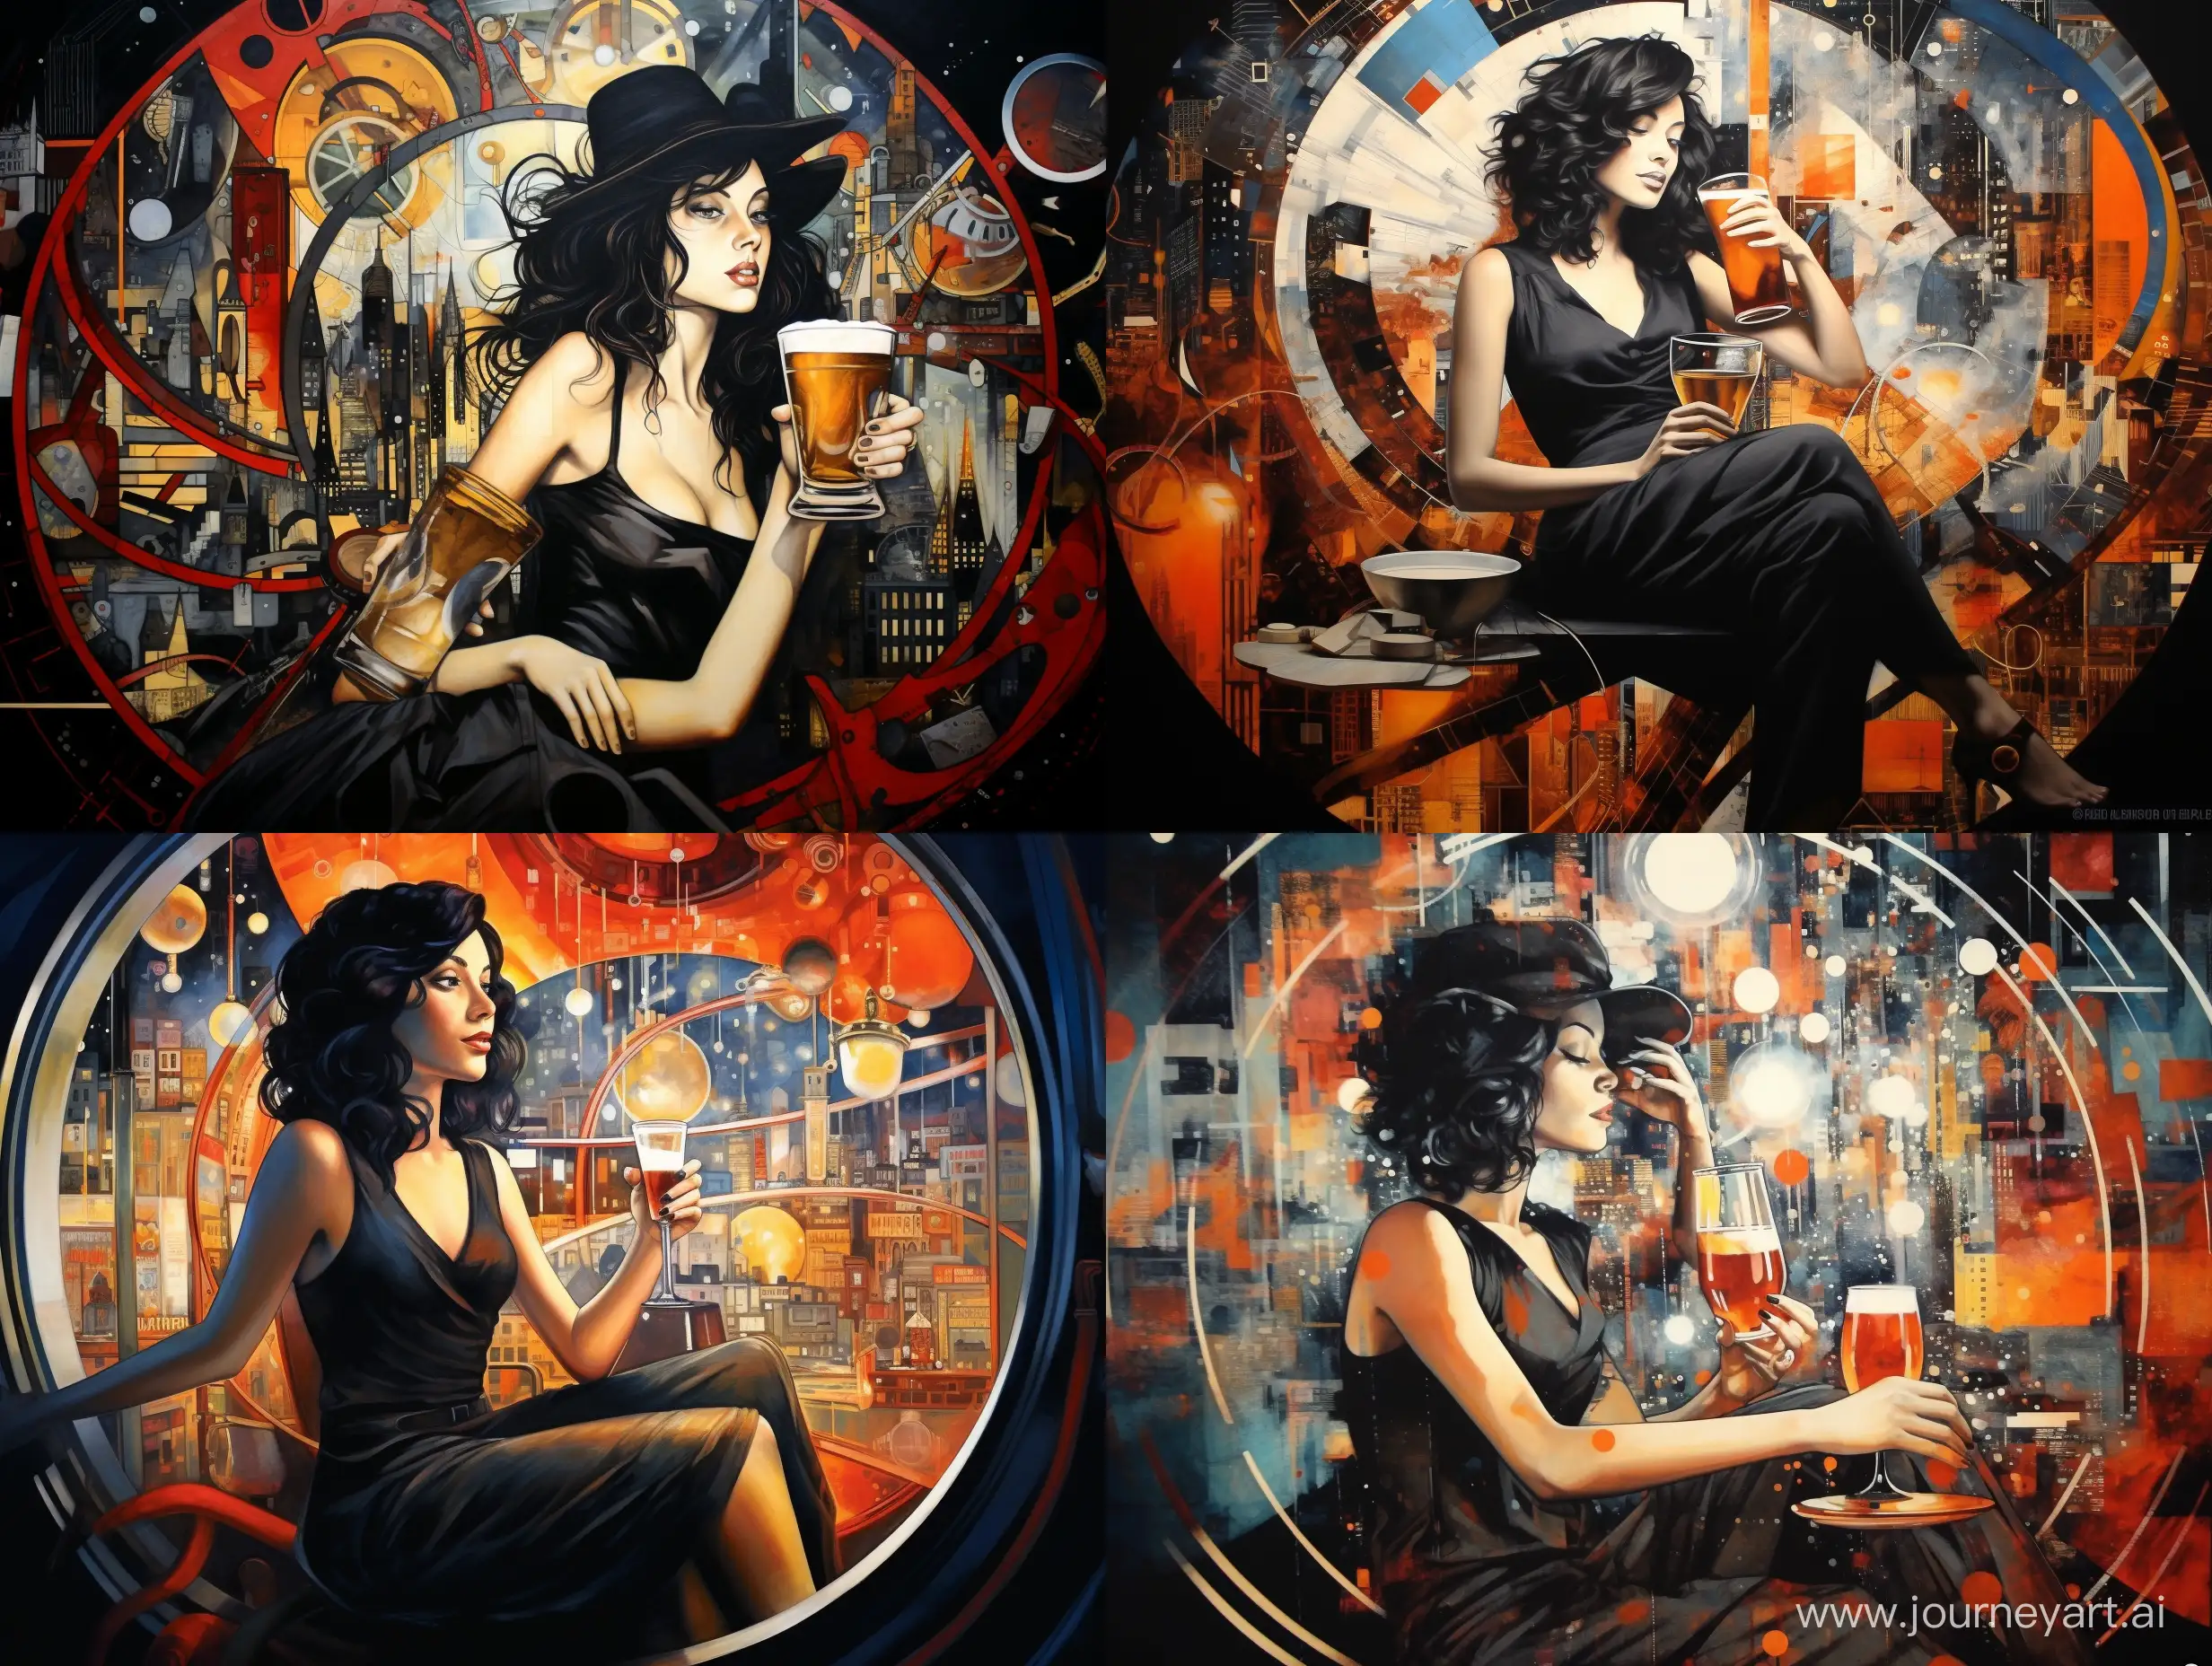 Surreal-Futuristic-Night-Women-Crafting-SpaceInspired-Graffiti-with-Craft-Beers